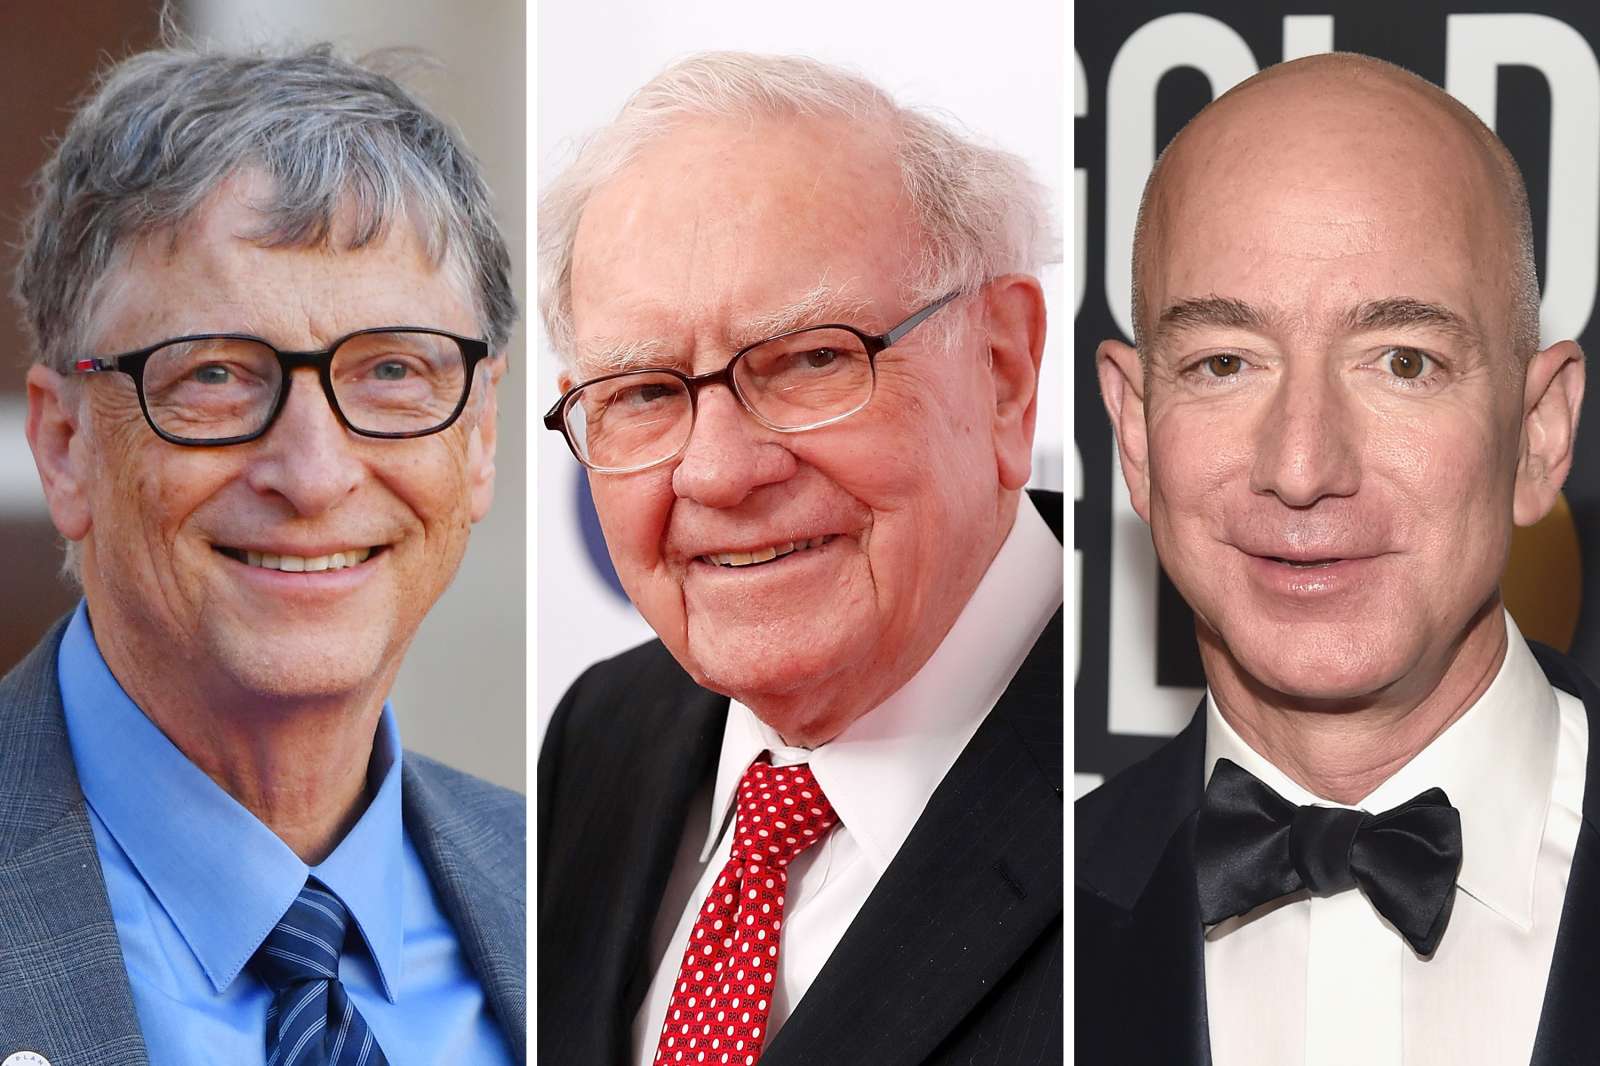 https://money.com/the-10-richest-people-in-america/ (Accessed April 4, 2023).